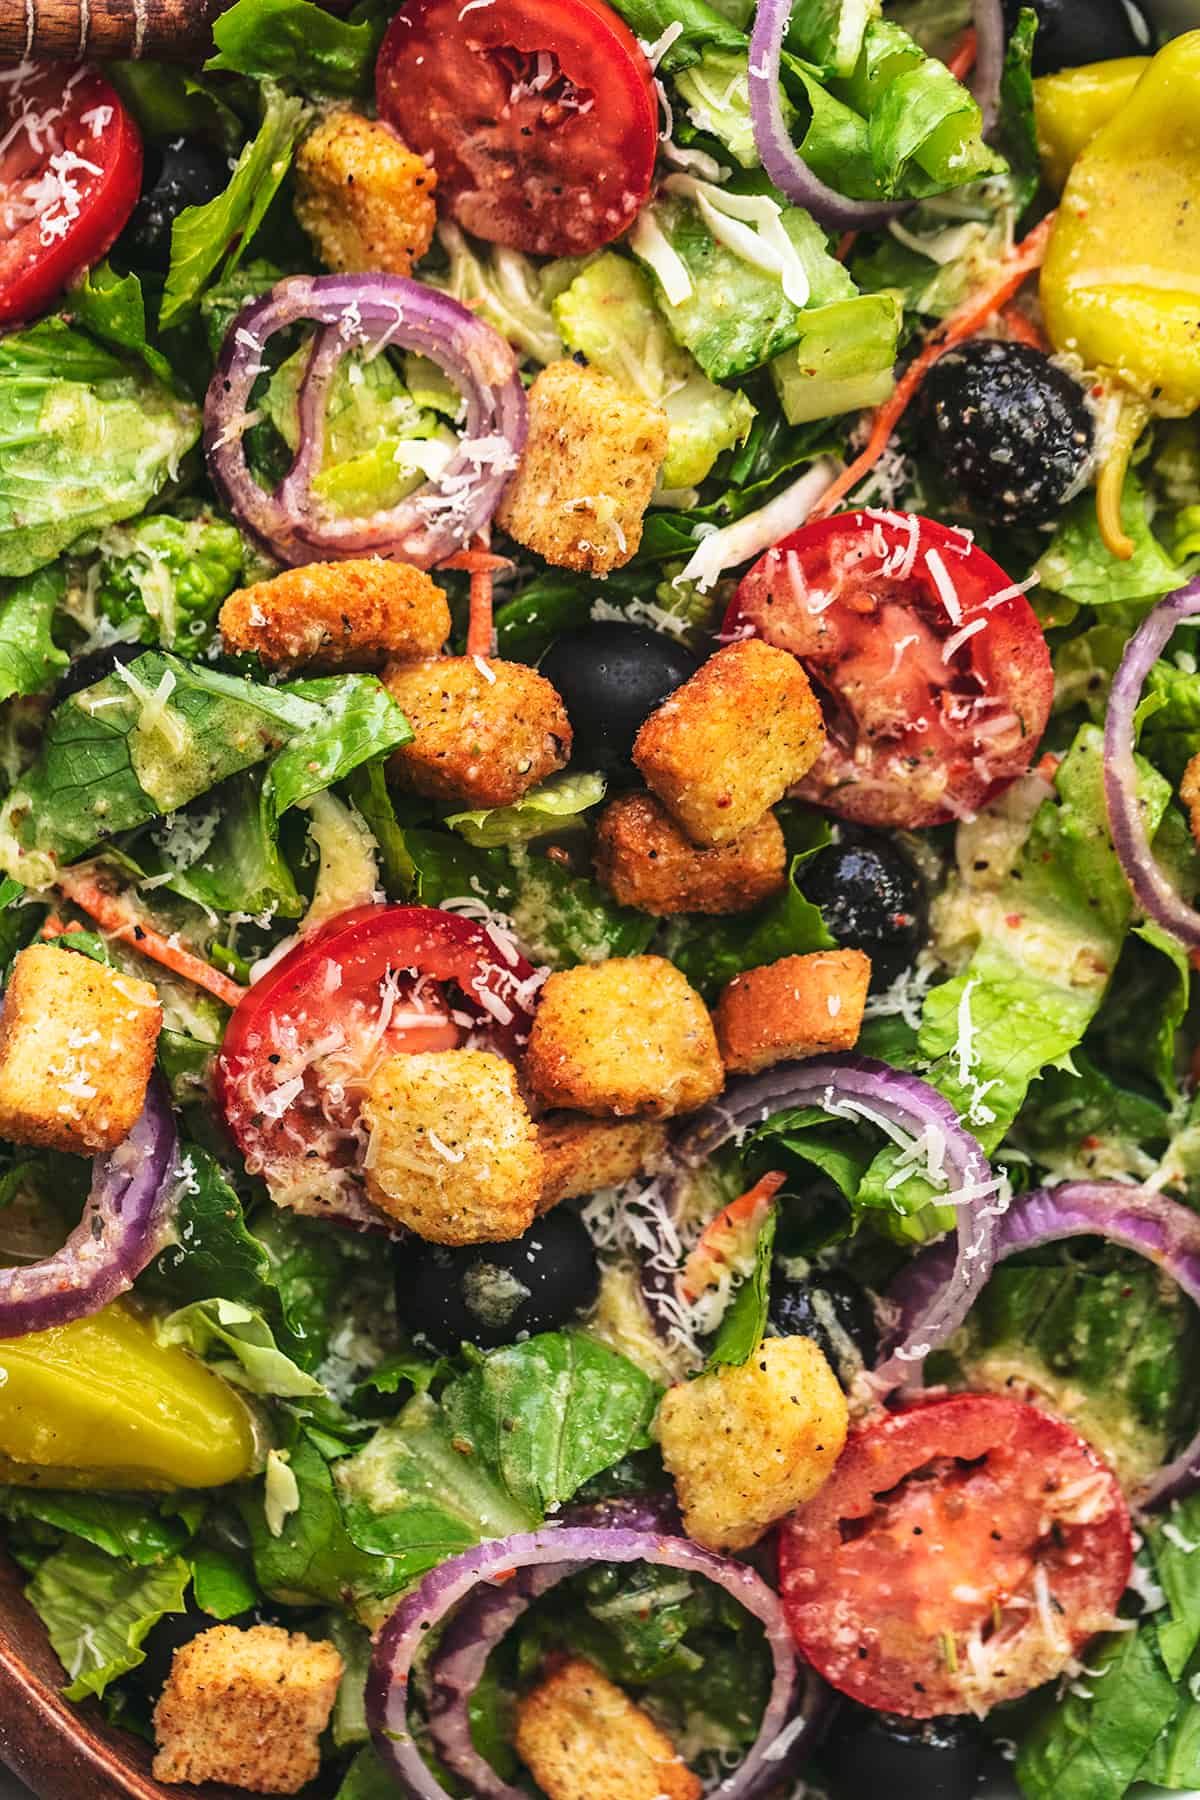 up close view of salad with croutons, tomatoes, onions, and olives